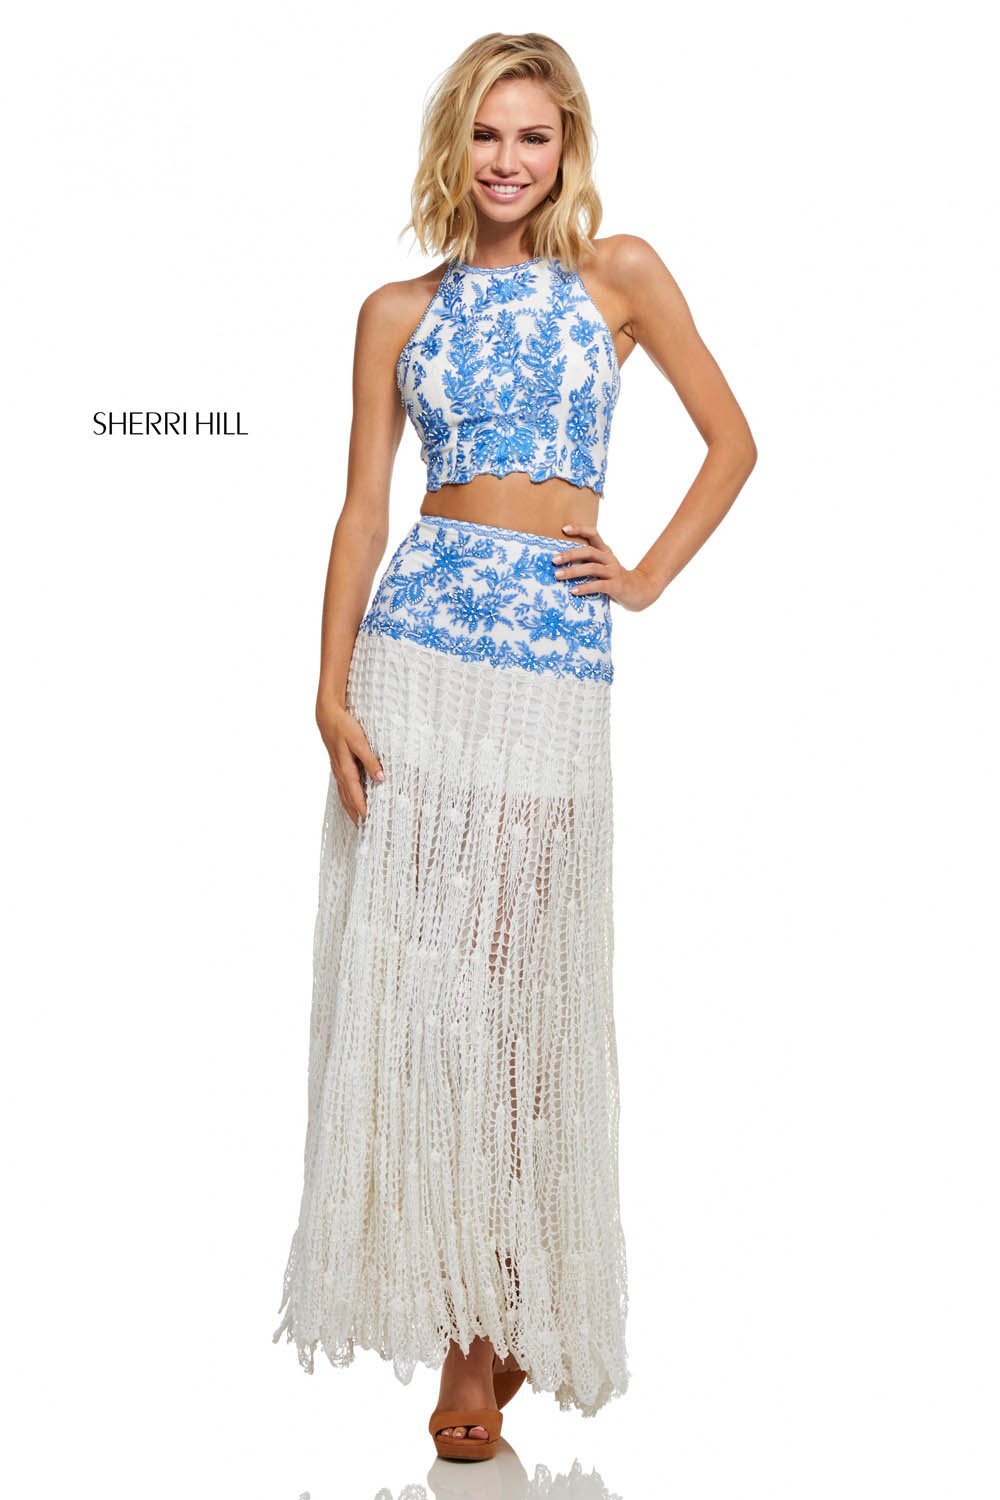 Sherri Hill 52671 dress images in these colors: Ivory, Ivory Blue, Black.